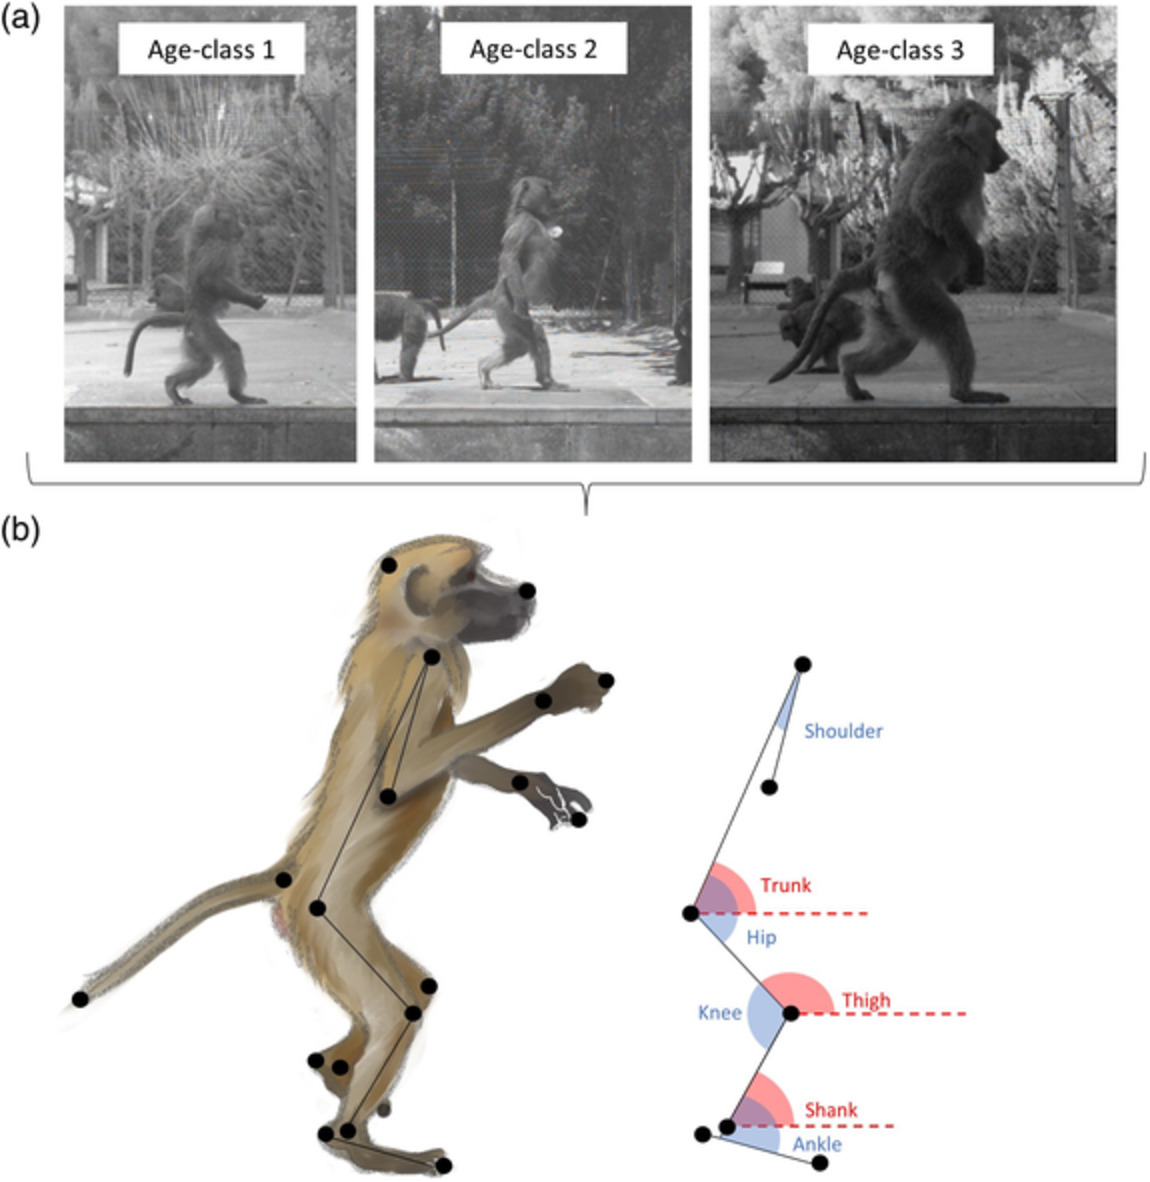 Development of bipedal walking in olive baboons, Papio anubis: A kinematic analysis